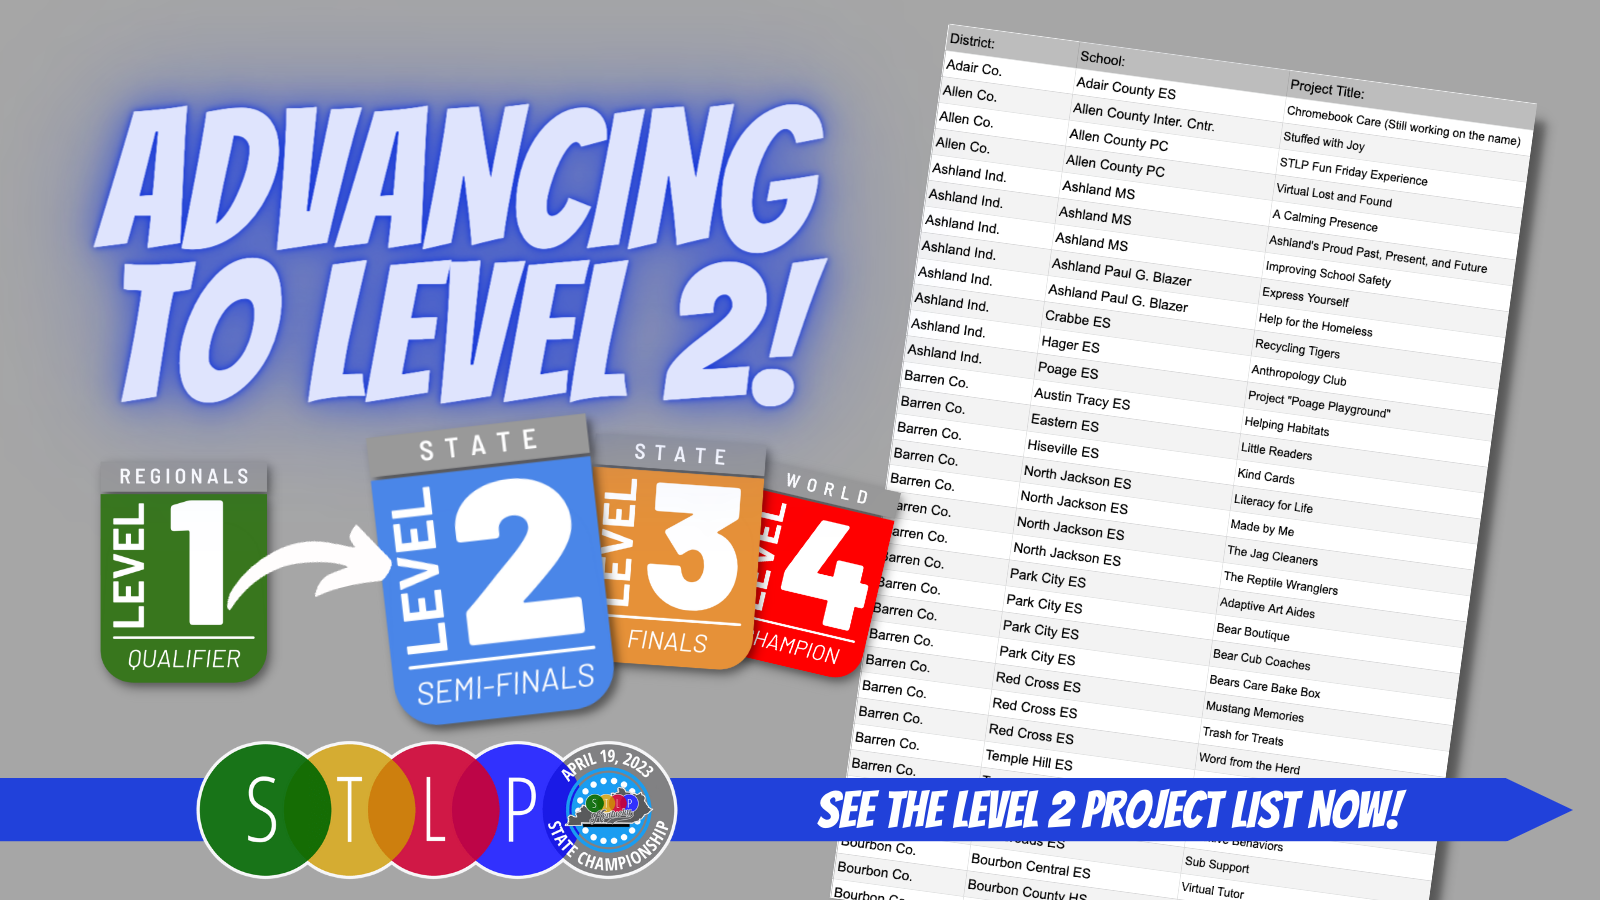 Congratulations to the STLPO Projects advancing to Level 2 at STLP State